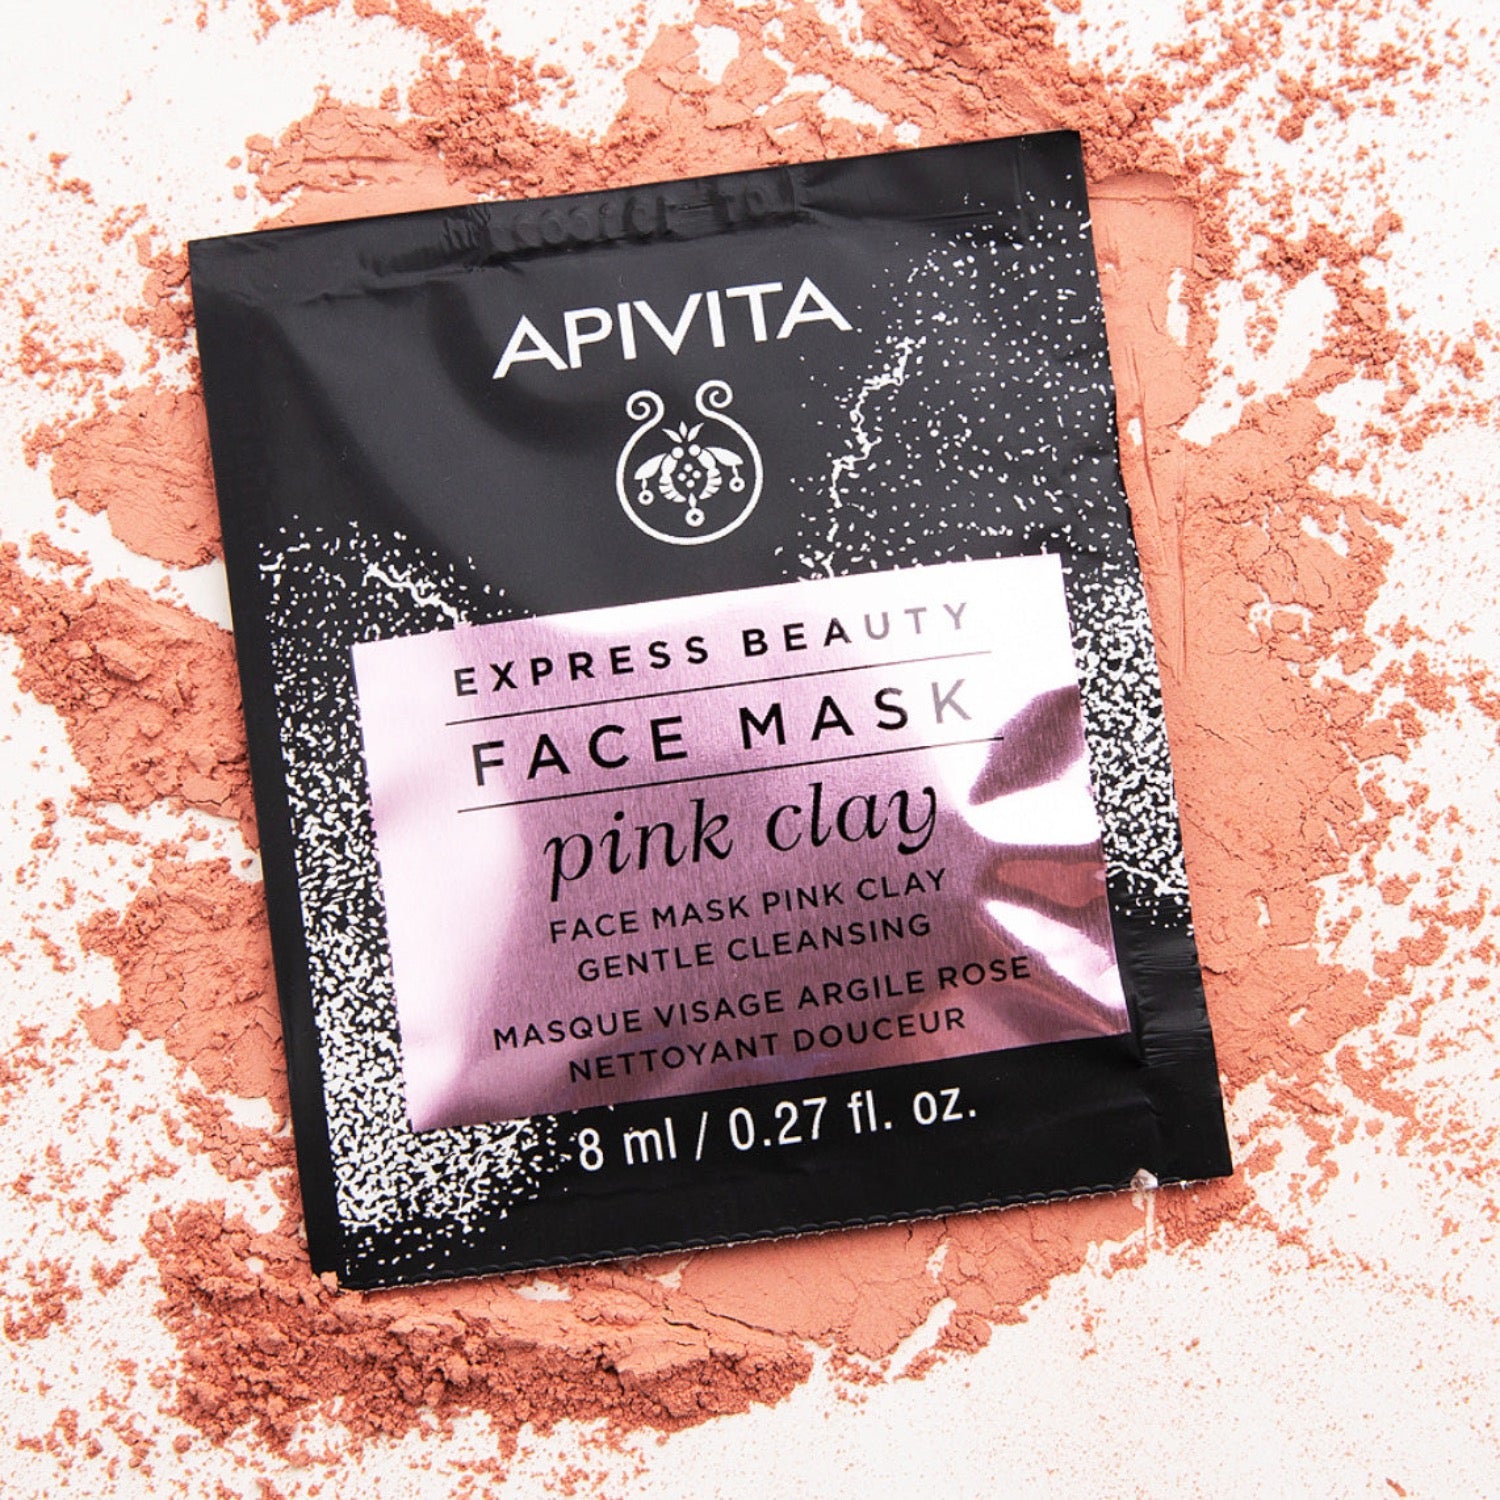 Apivita Express Beauty face mask with pink clay contains rose extract, chamomile, Greek thyme honey, calendula and wheat proteins help maintain skin hydration while invigorating it with rose essential oil.